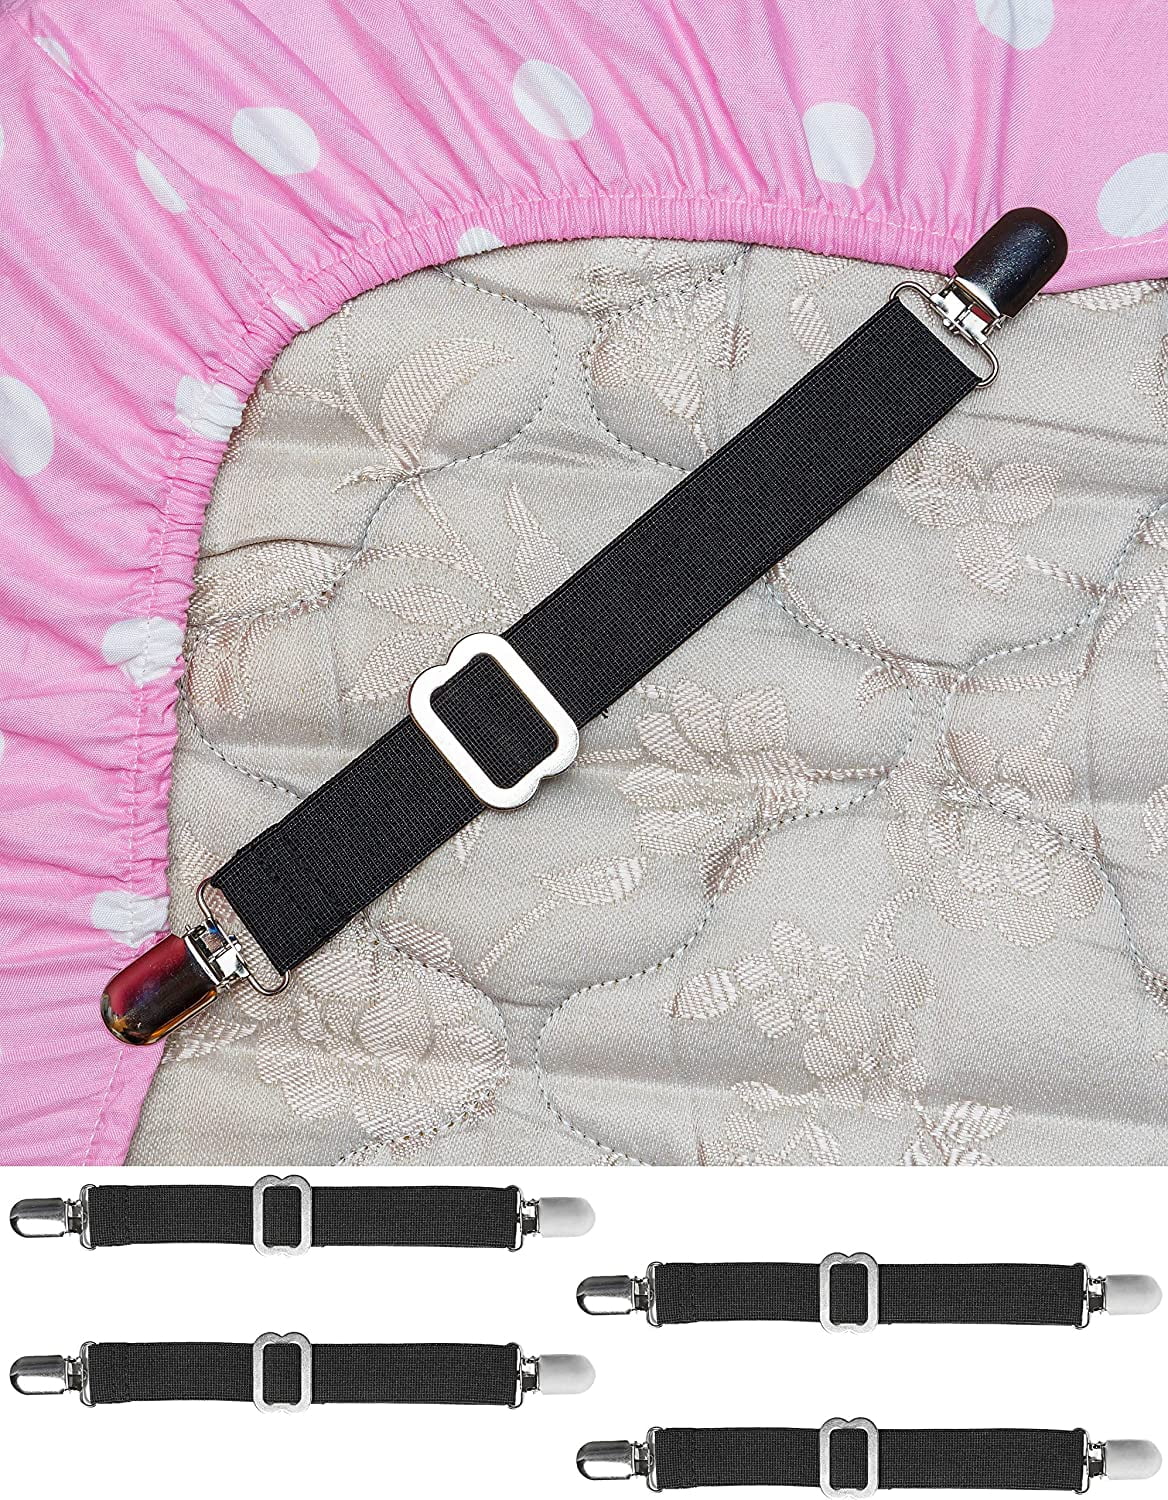 Clips 4PCS and Adjustable Bed Bands to Keep Sheets from Sliding Available in Twin and King Sizes Full Queen Sheet Straps with Heavy Duty Suspenders